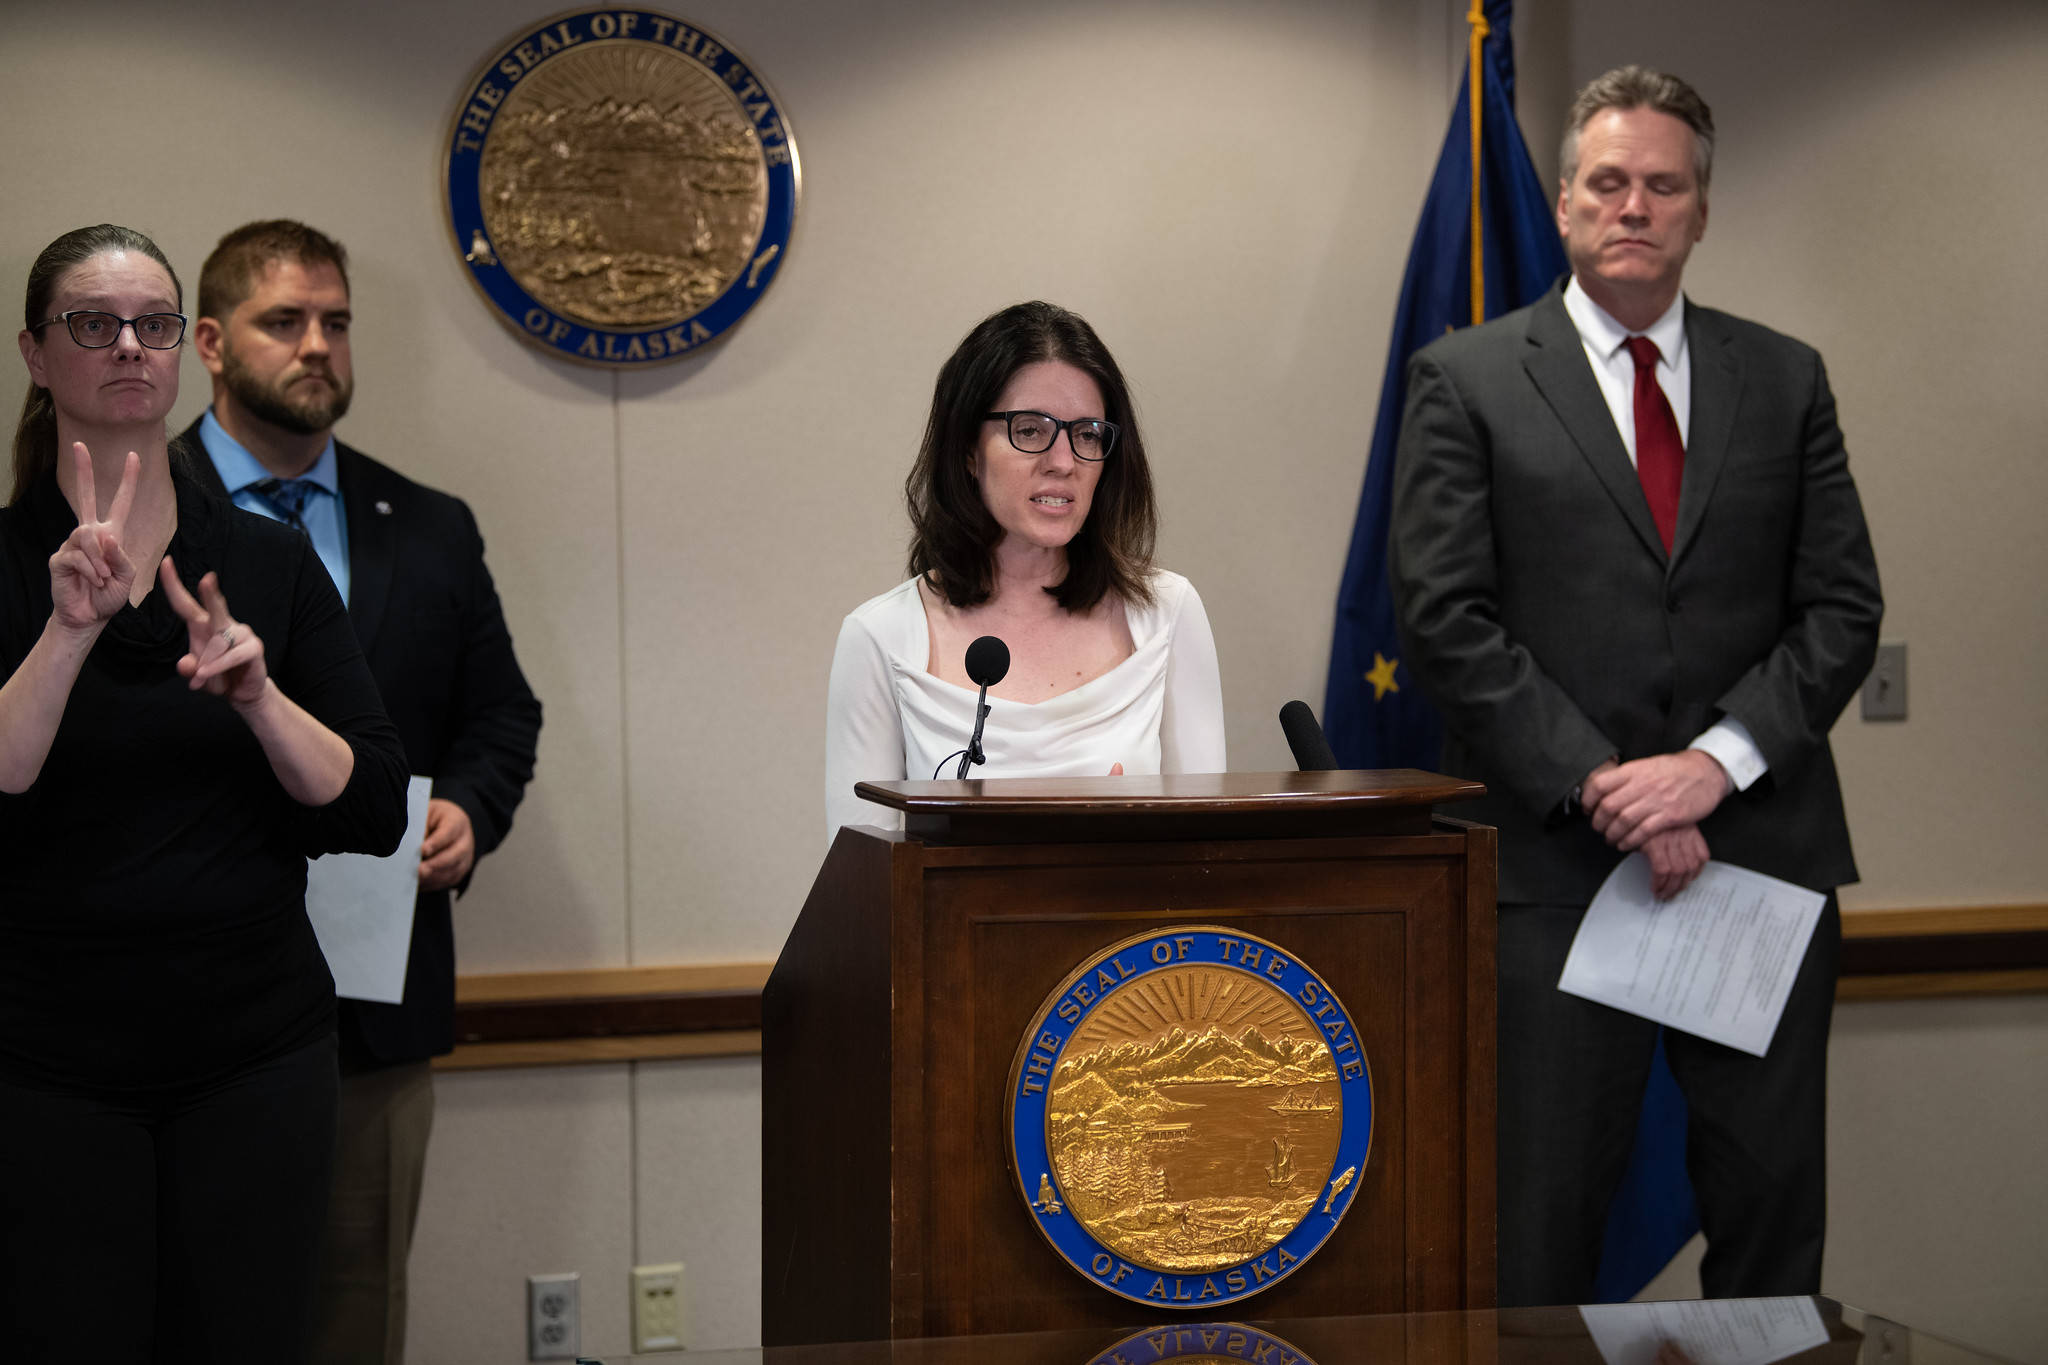 Chief Medical Officer Dr. Anne Zink speaks at a press conference on Friday, March 20, 2020 in Anchorage, Alaska. (Photo courtesy Office of the Governor)